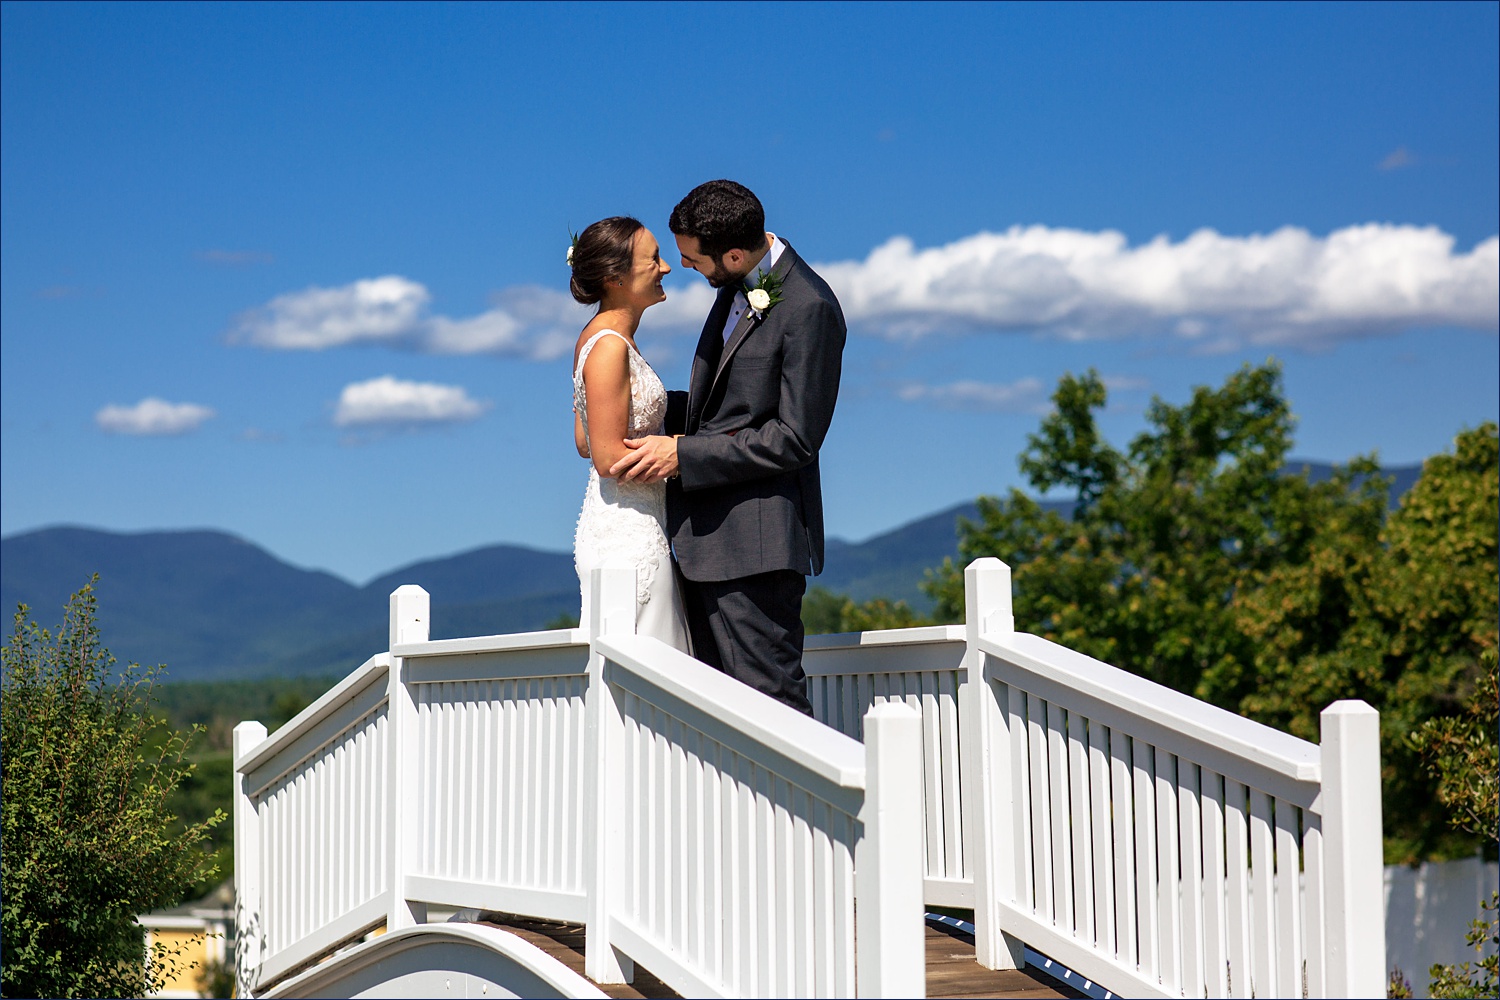 The bride and groom can't hold in their laughter on the bridge at Mountain View Grand Resort